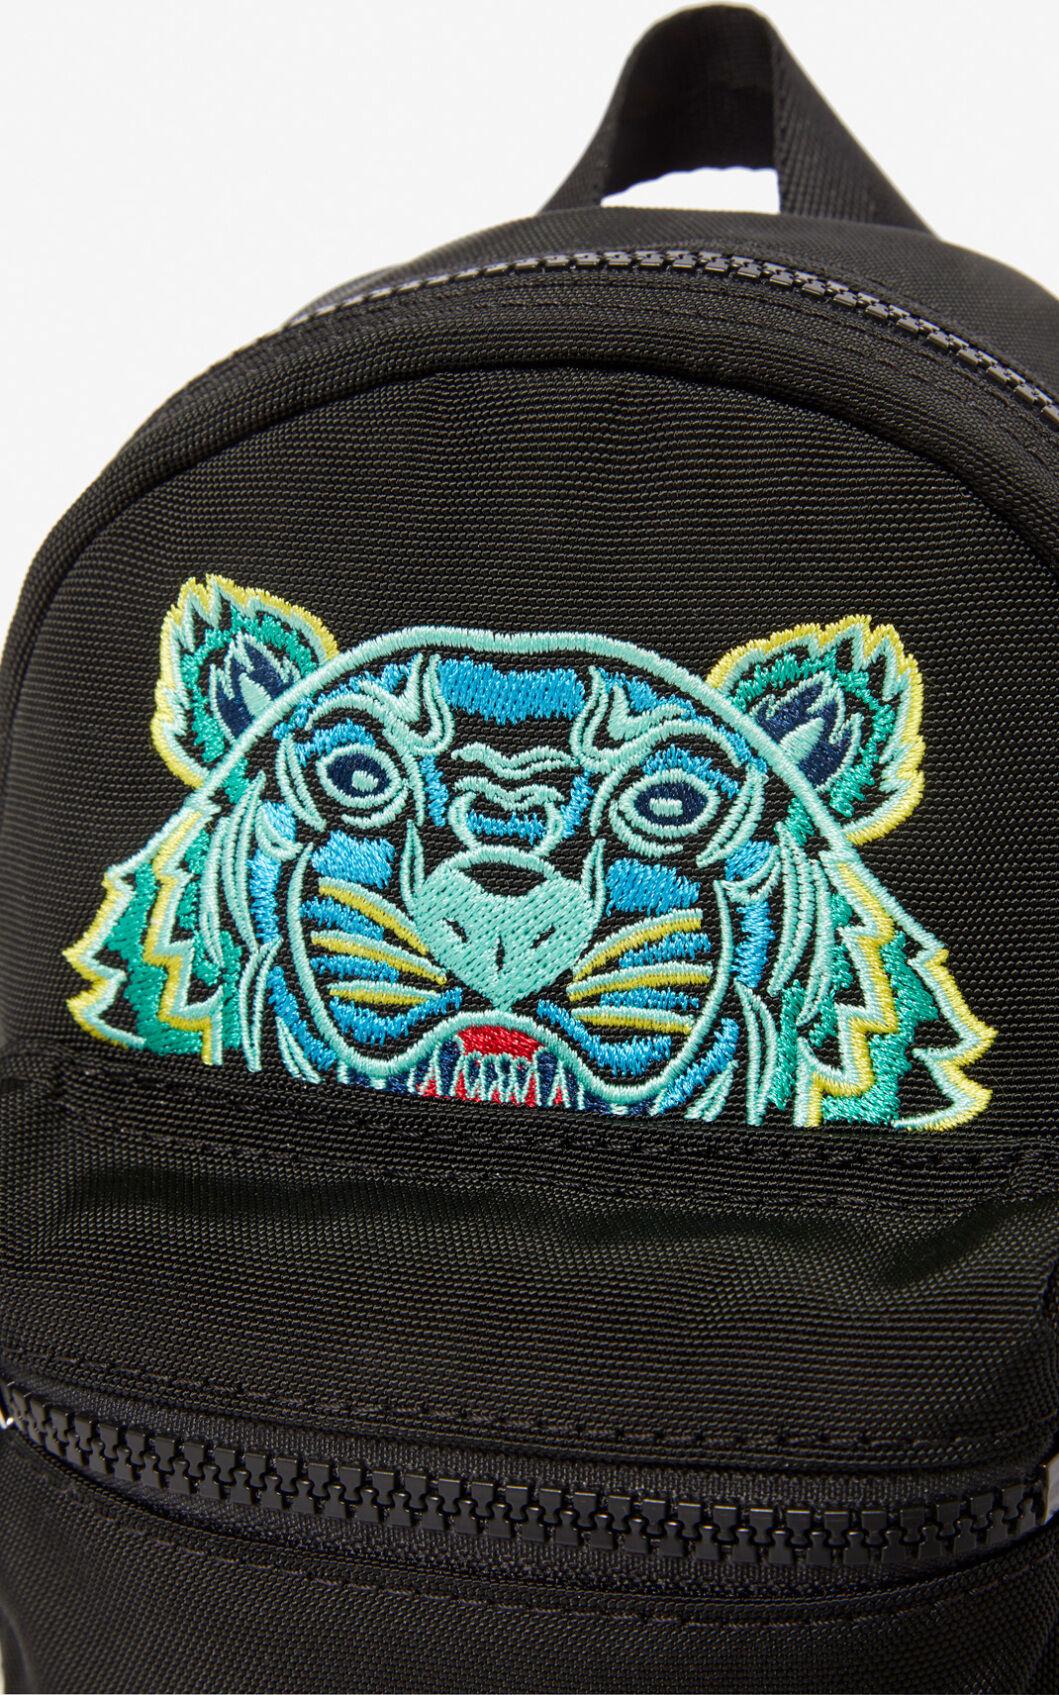 KENZO Mini Tiger Canvas Backpack in Black for Men - Lyst